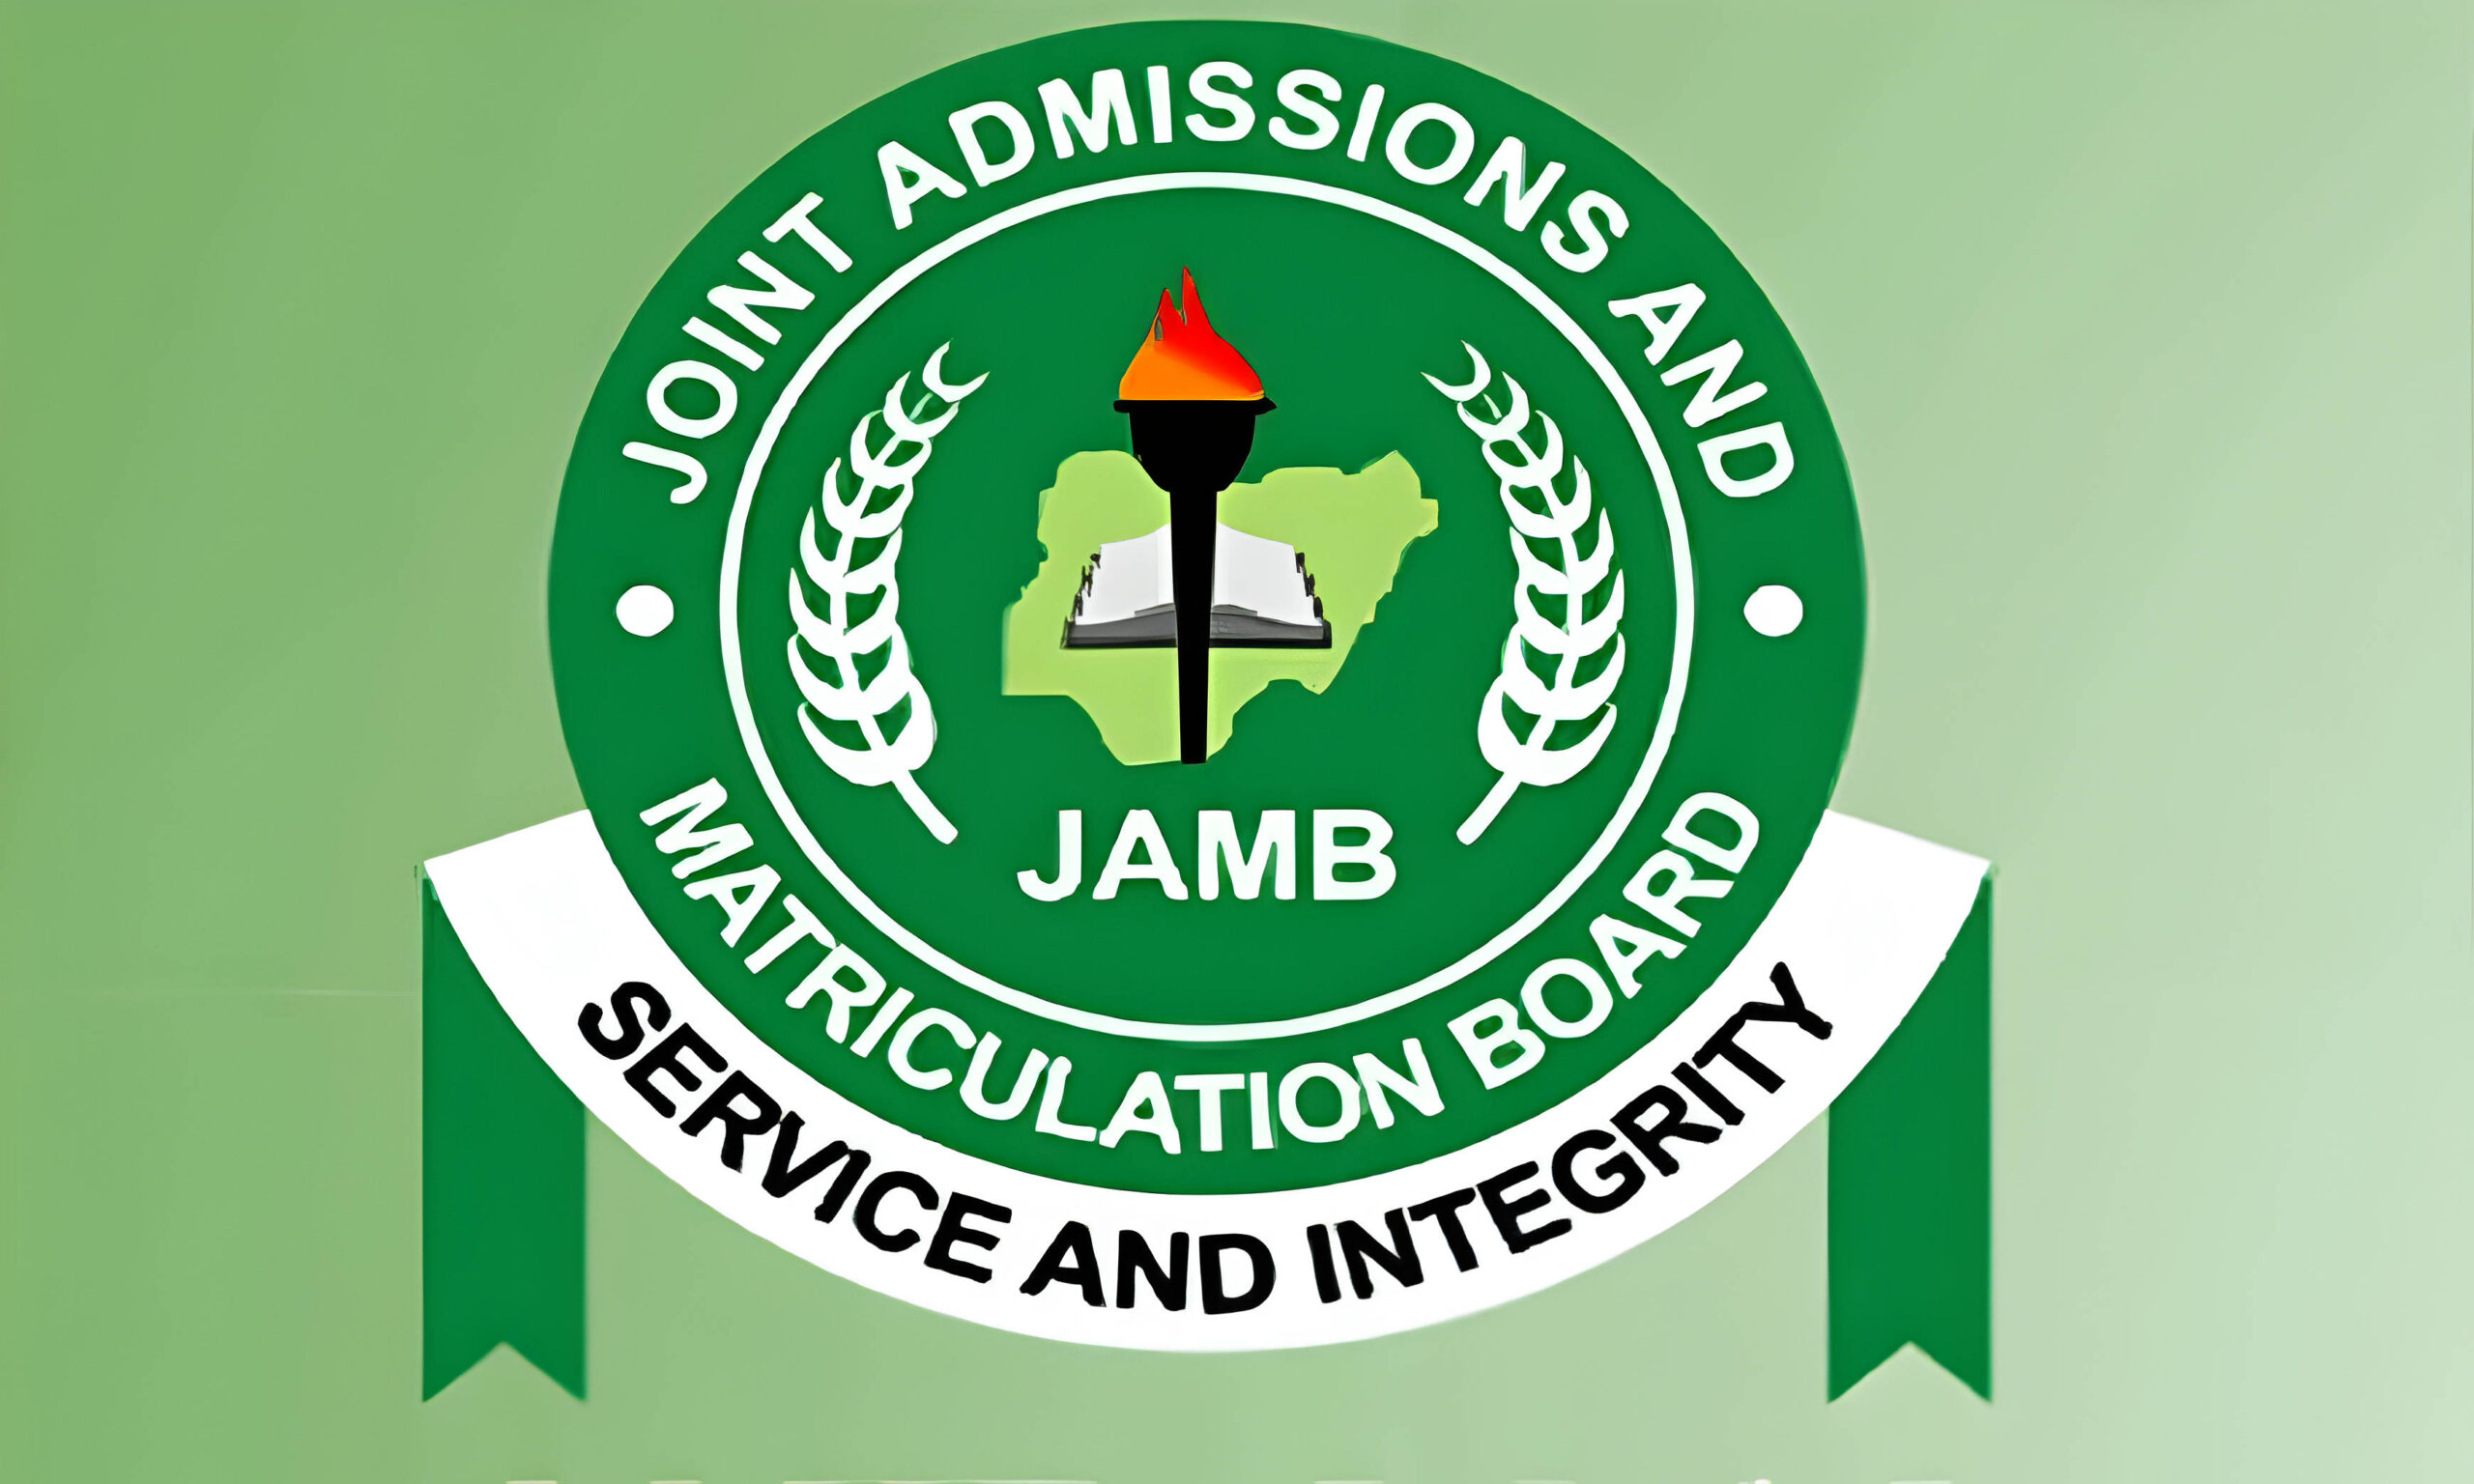 What you need for your JAMB registration